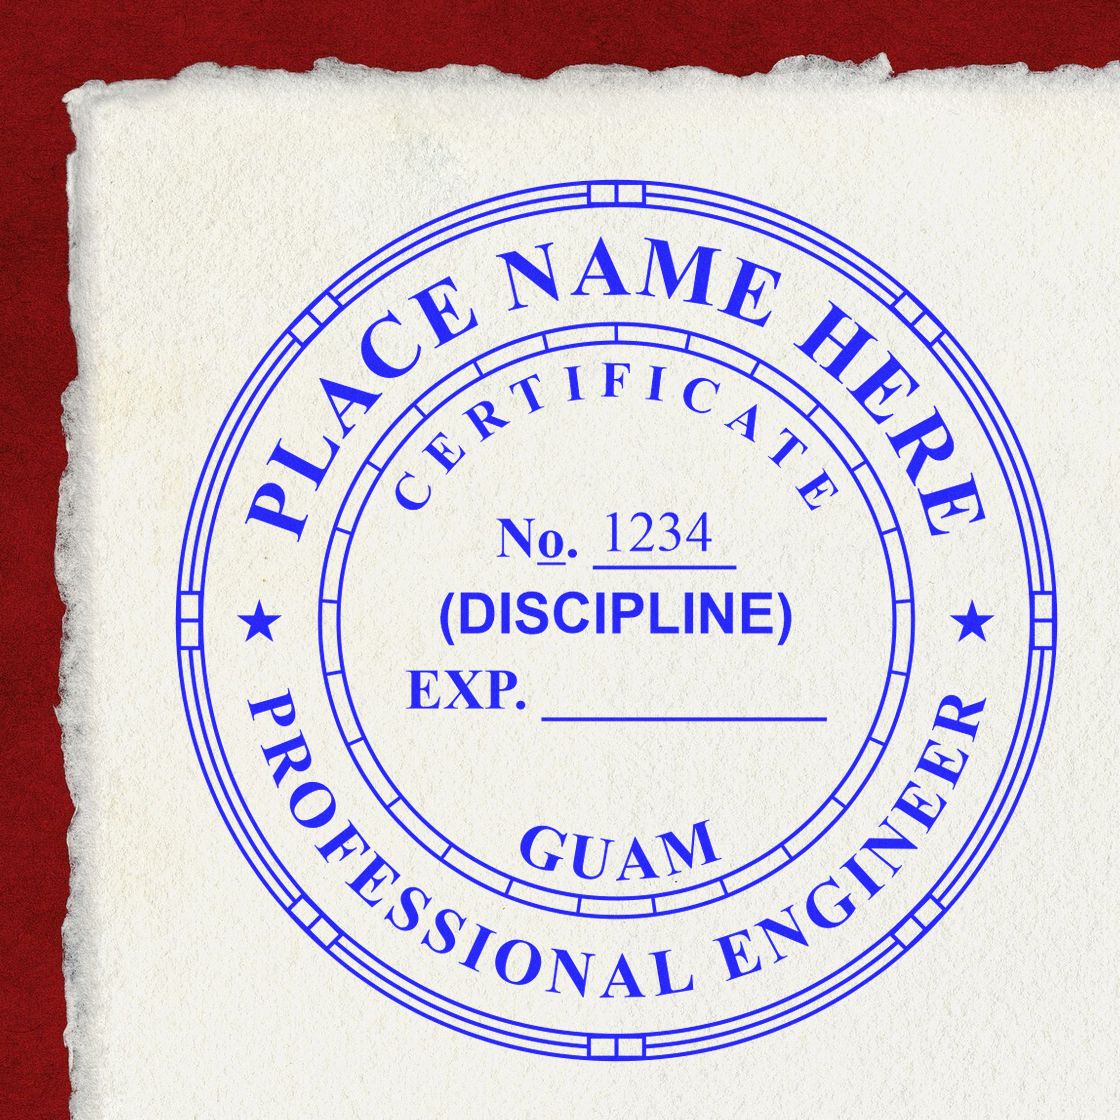 The Self-Inking Guam PE Stamp stamp impression comes to life with a crisp, detailed photo on paper - showcasing true professional quality.